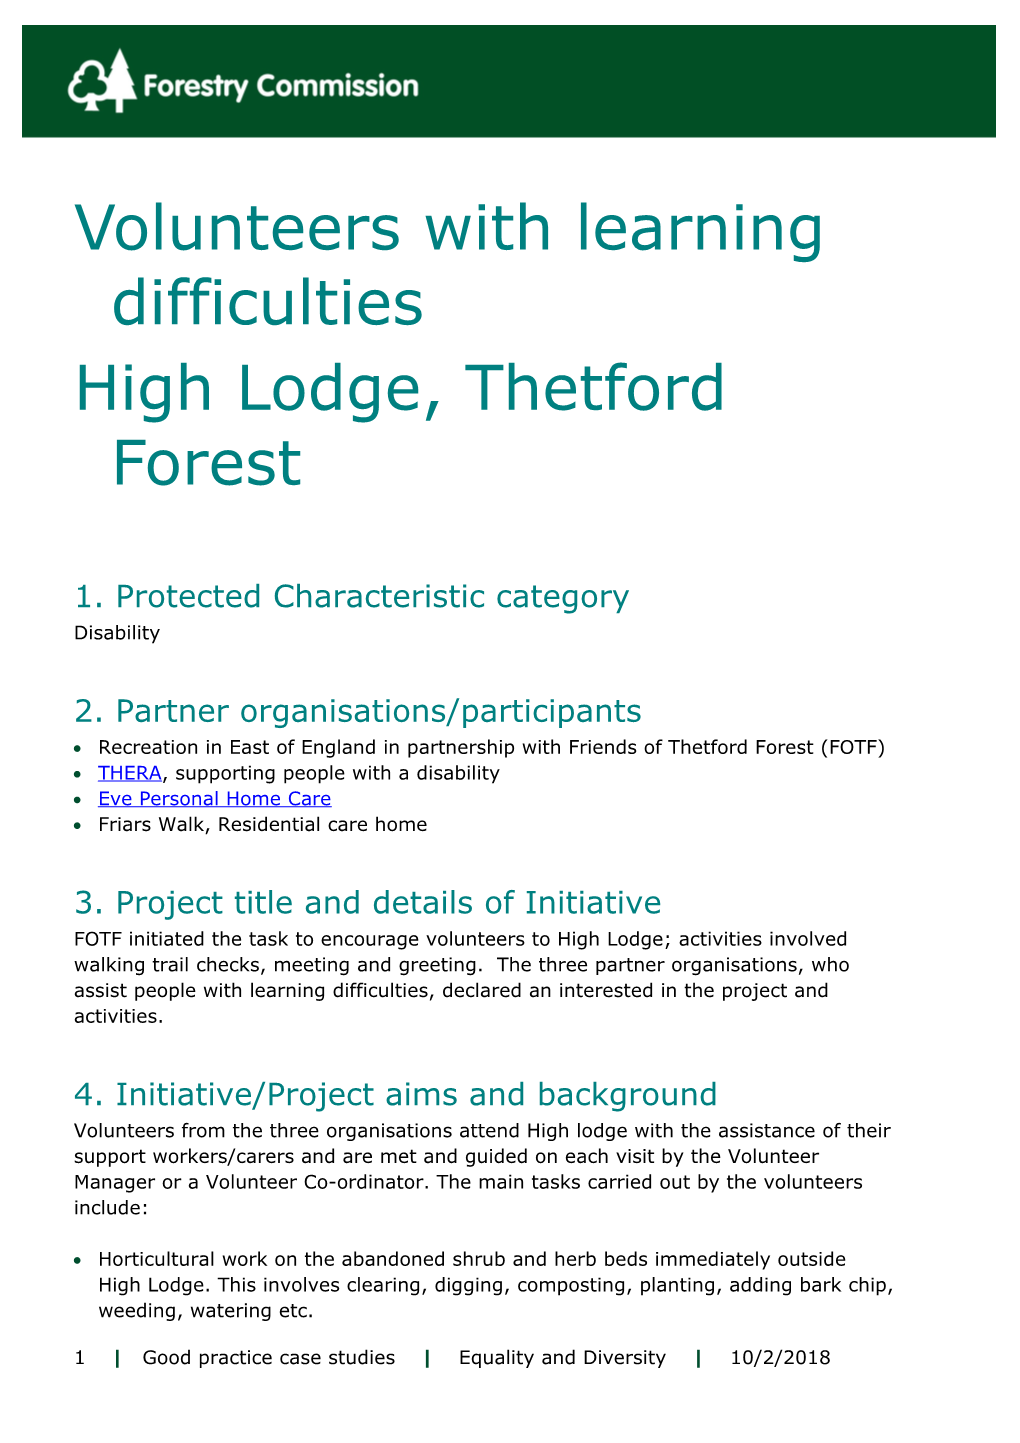 Volunteers with Learning Difficulties